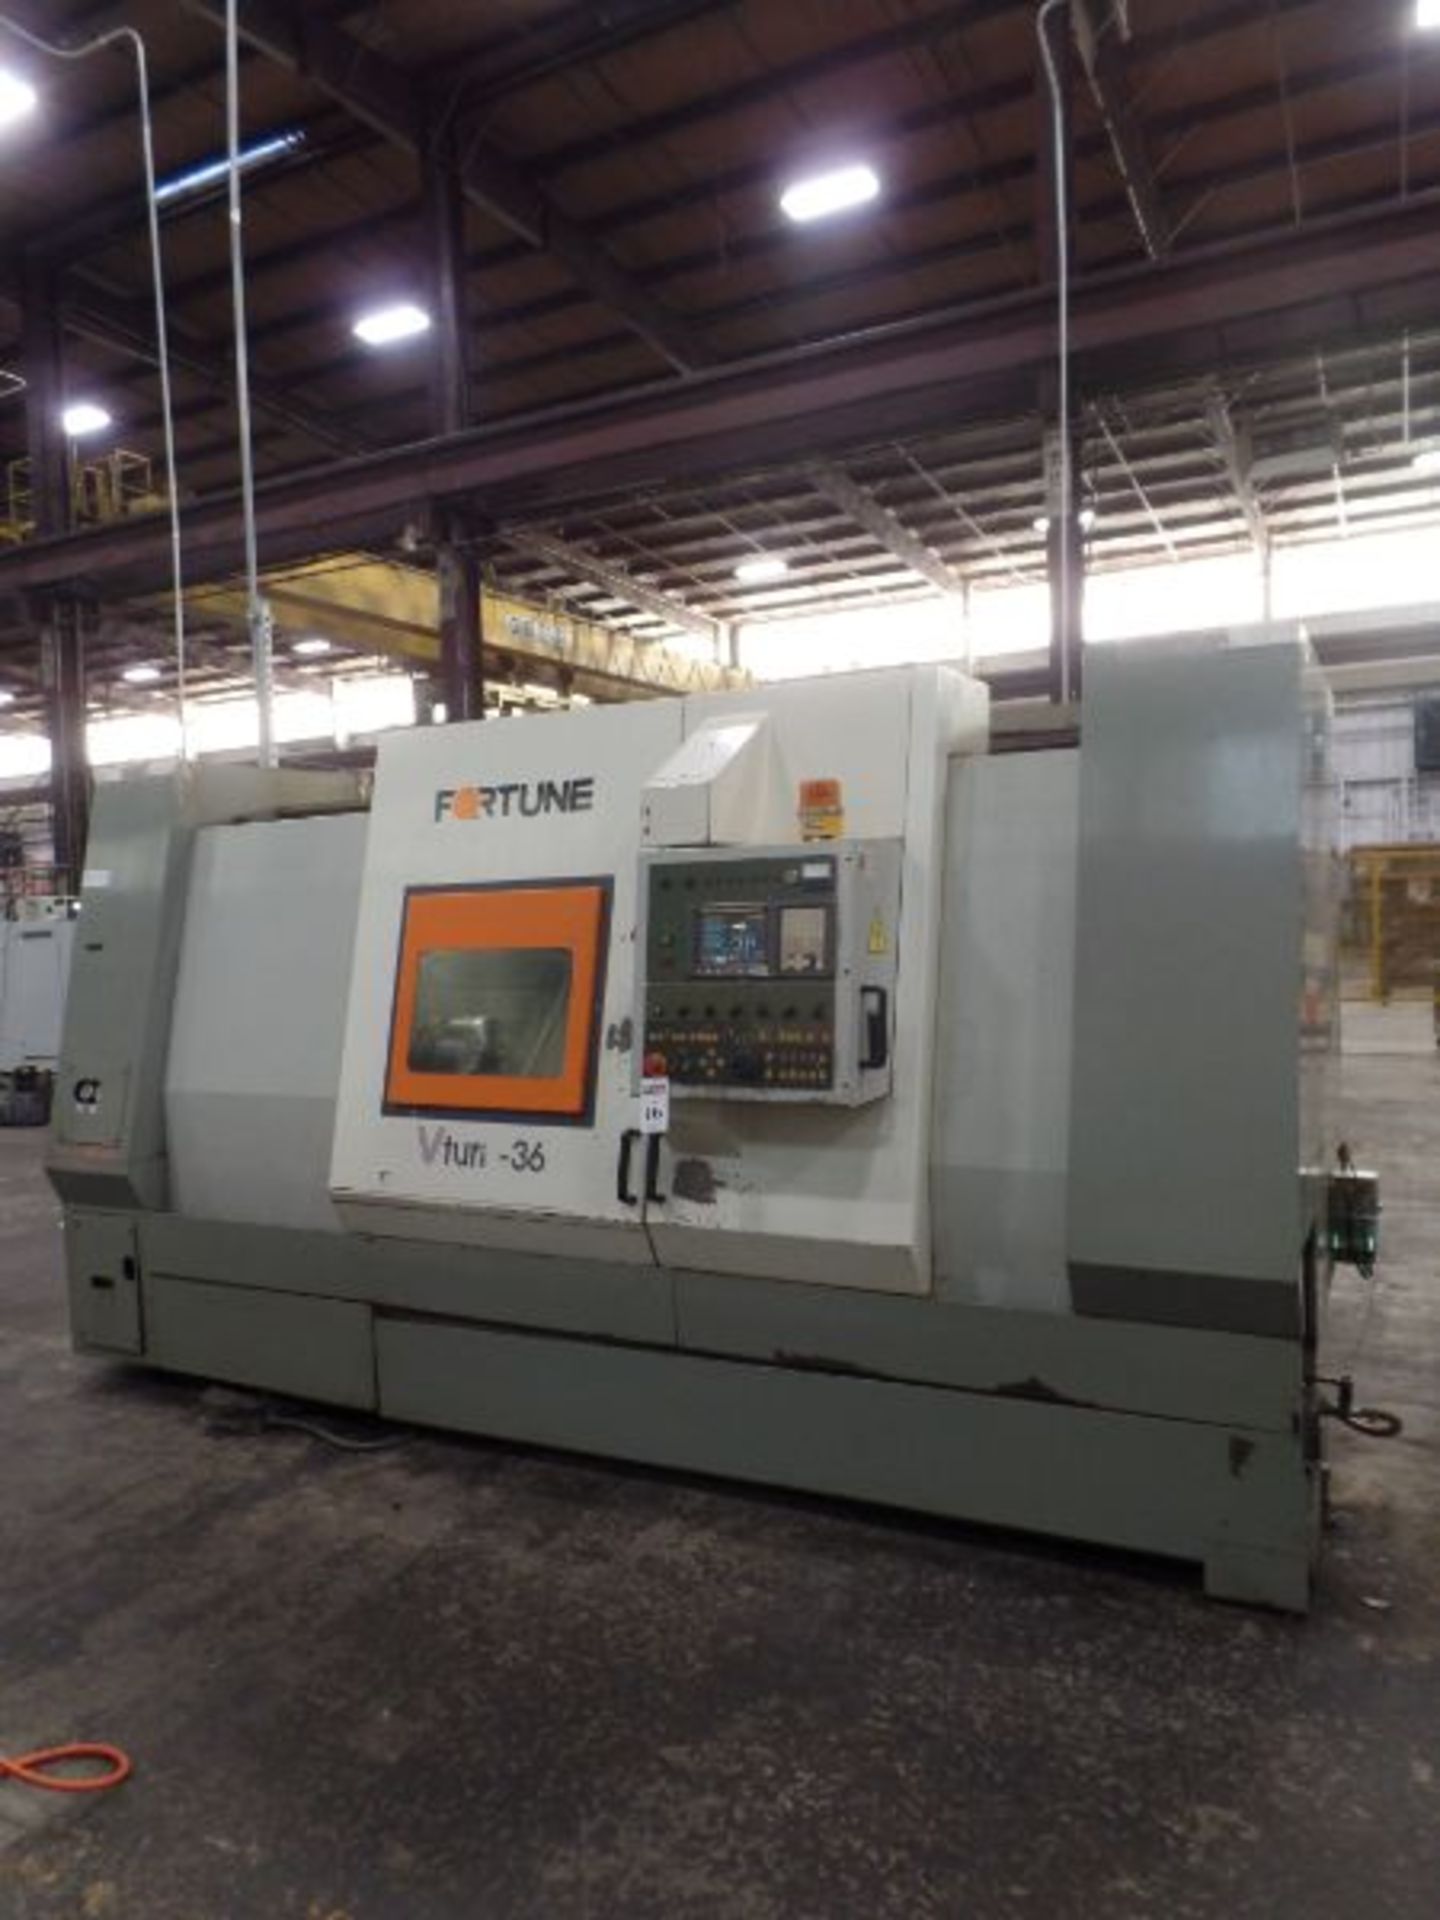 Fortune Vturn-36, Fanuc 0i-T, 25.6” SW, 21.7” Max. Turn Dia. x 51” Centers, 4.1” Spindle Bore, - Image 3 of 11